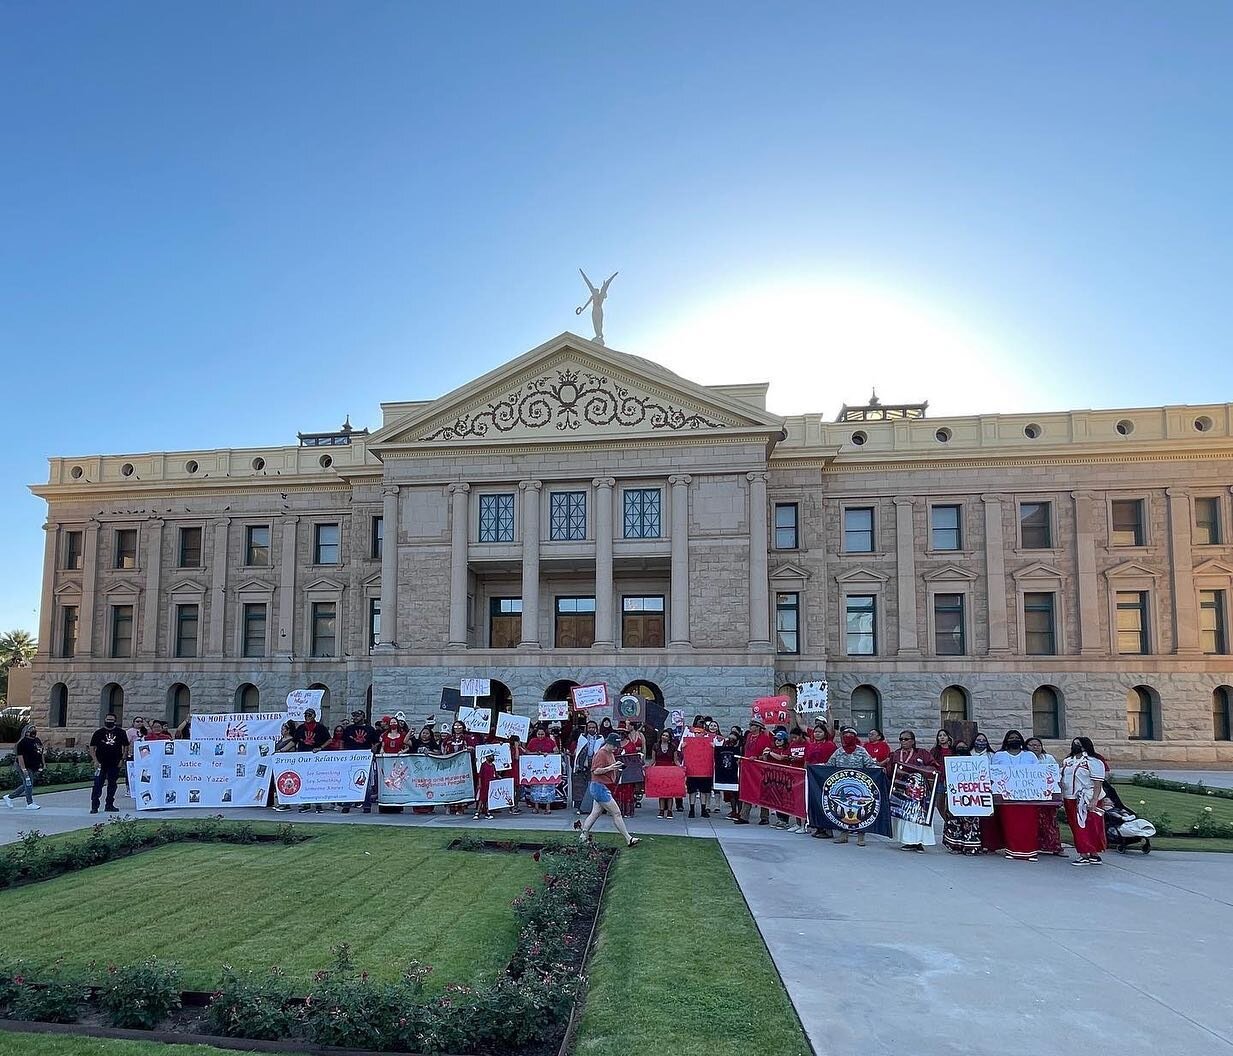 May 5th is the Missing and Murdered Indigenous Peoples Day of Awareness 

Today, myself and Representative Jennifer Jermaine introduced a legislative proclamation in the Arizona House of Representatives proclaiming May 5, 2022 as a day of an awarenes